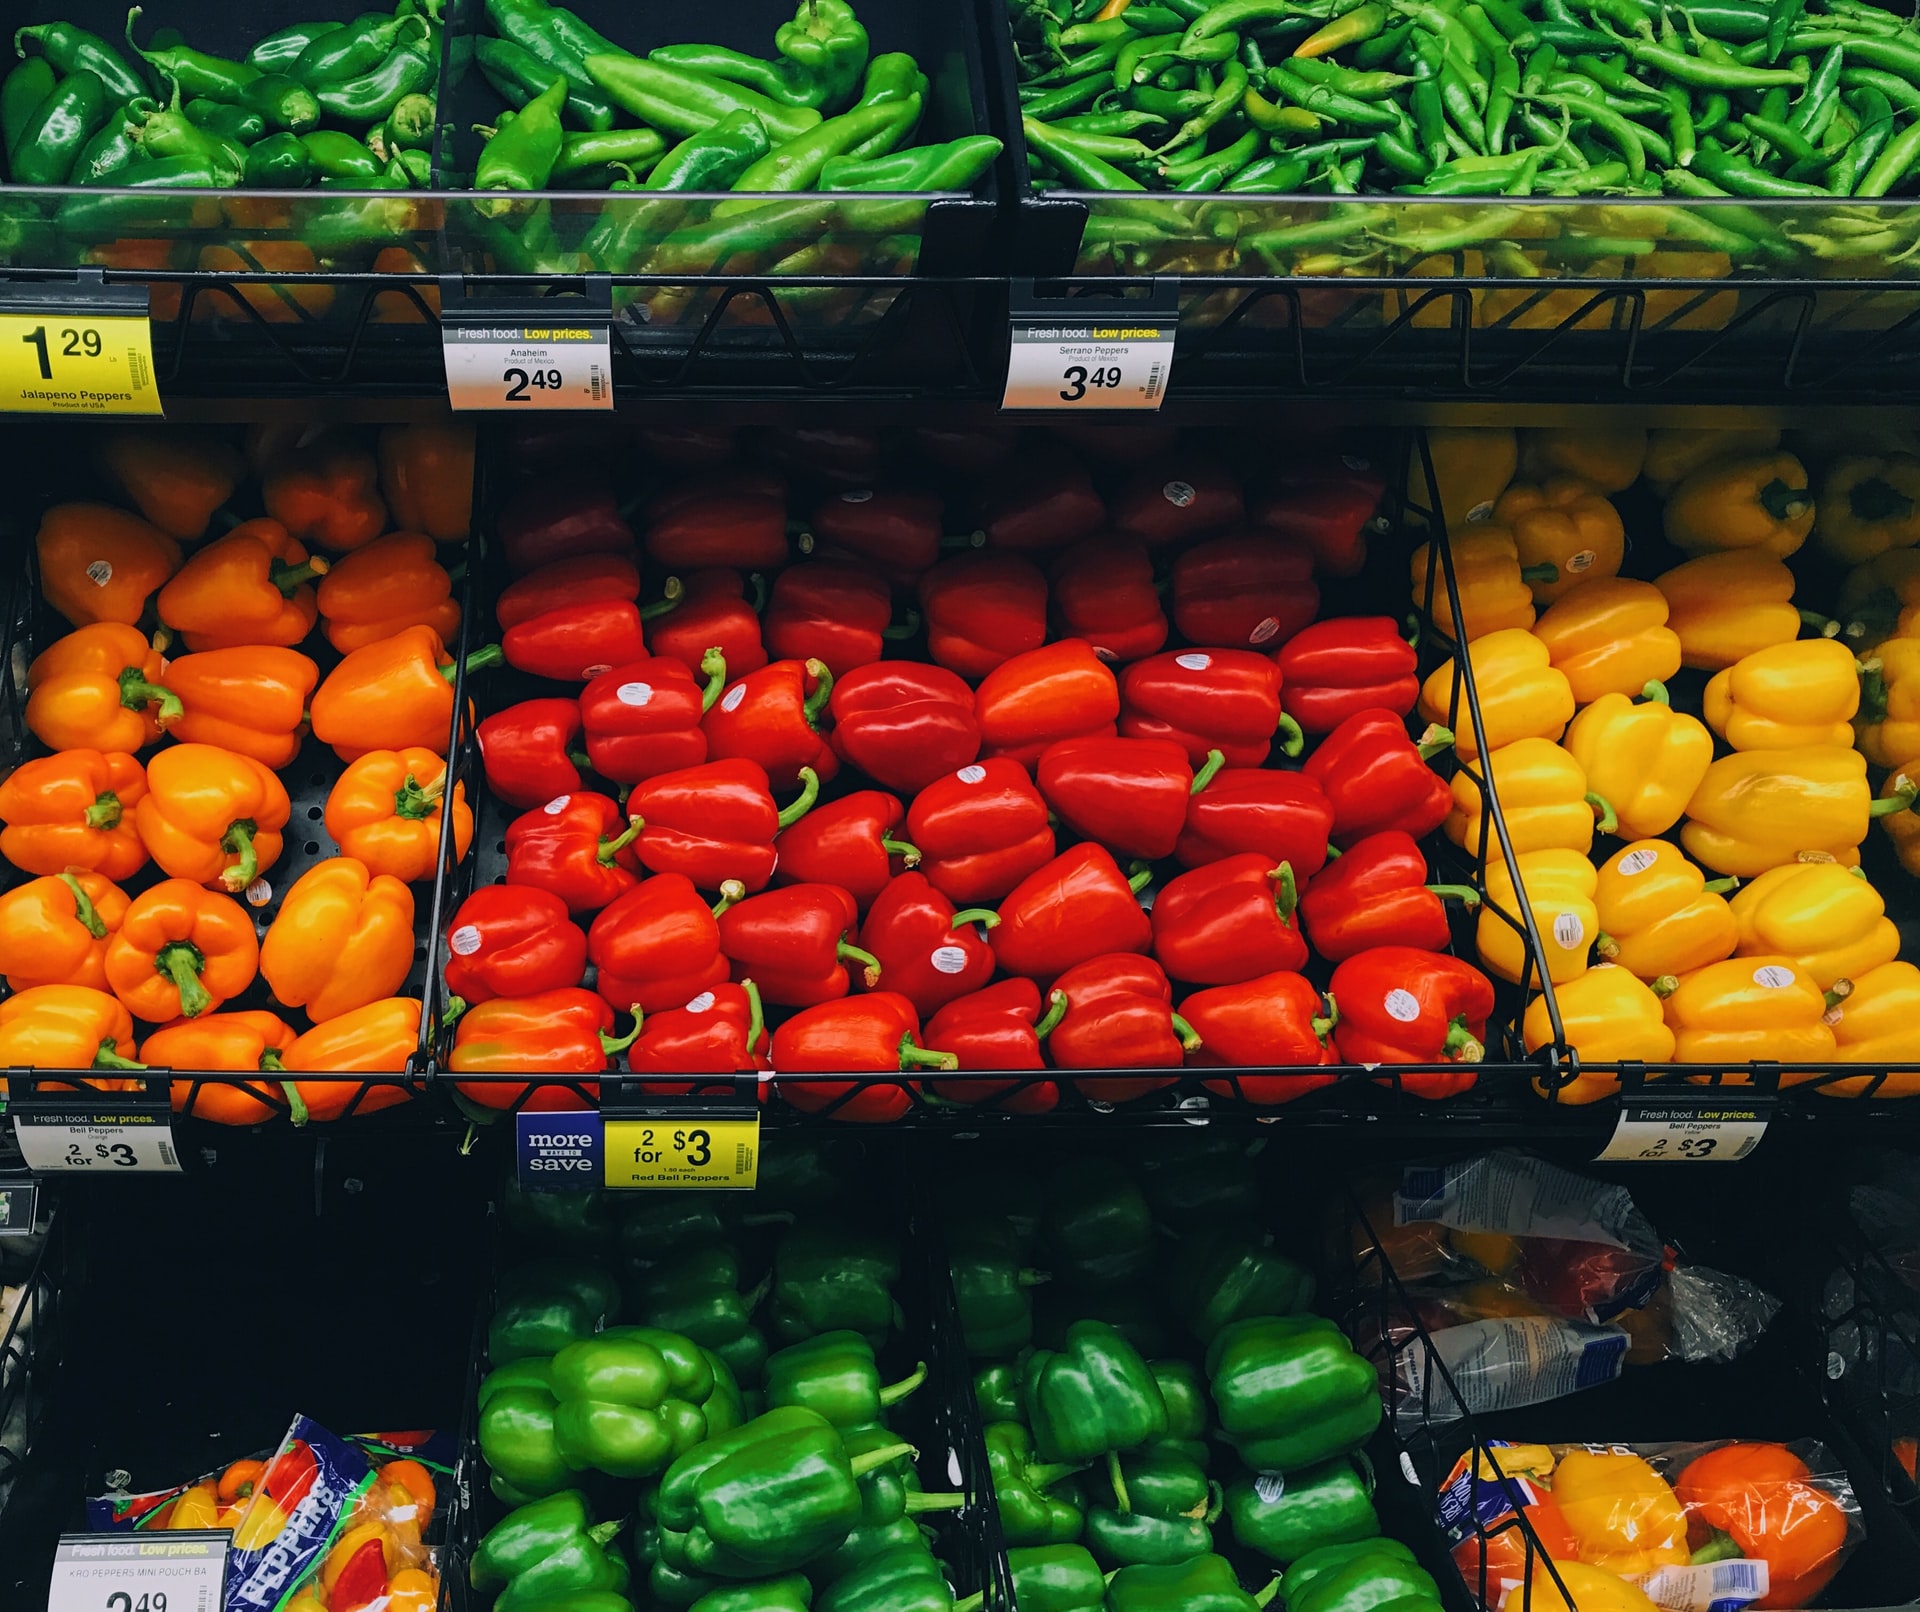 AI pricing technology can help retailers manage challenging categories, such as perishables.